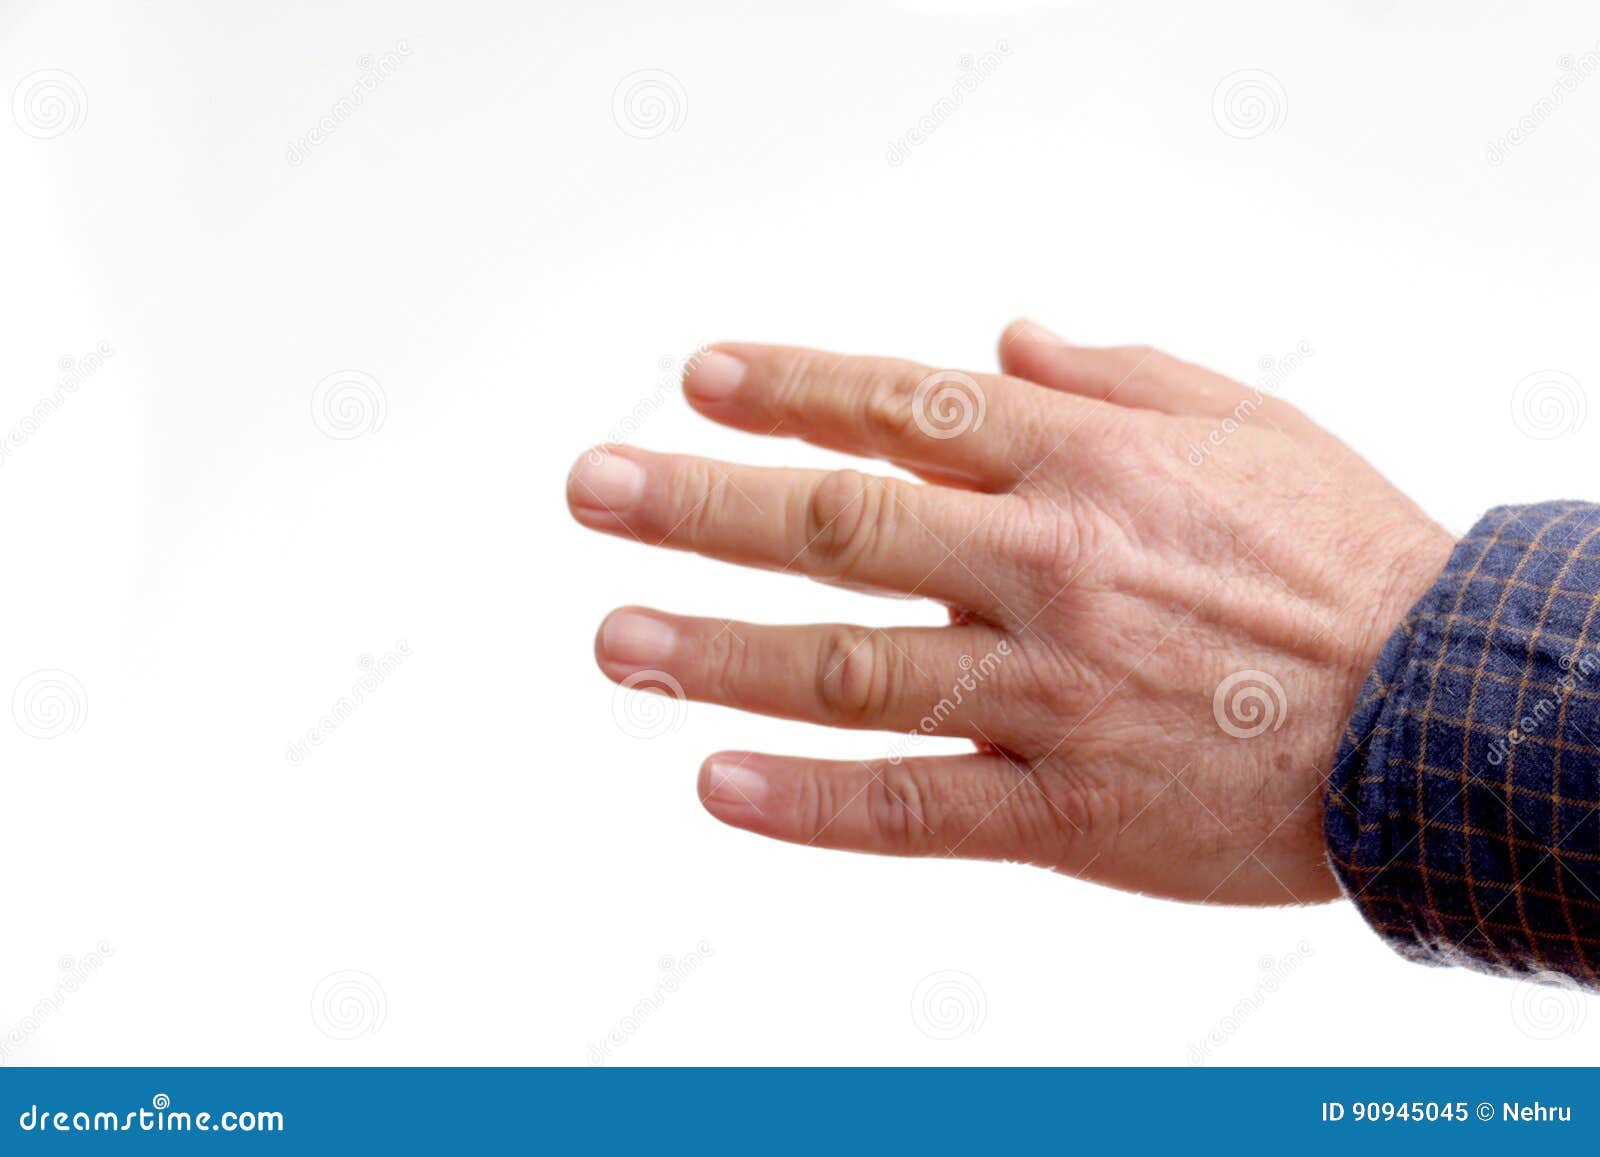 Hands of Middle-aged Woman Deformed by Arthritis Stock Image - Image of ...